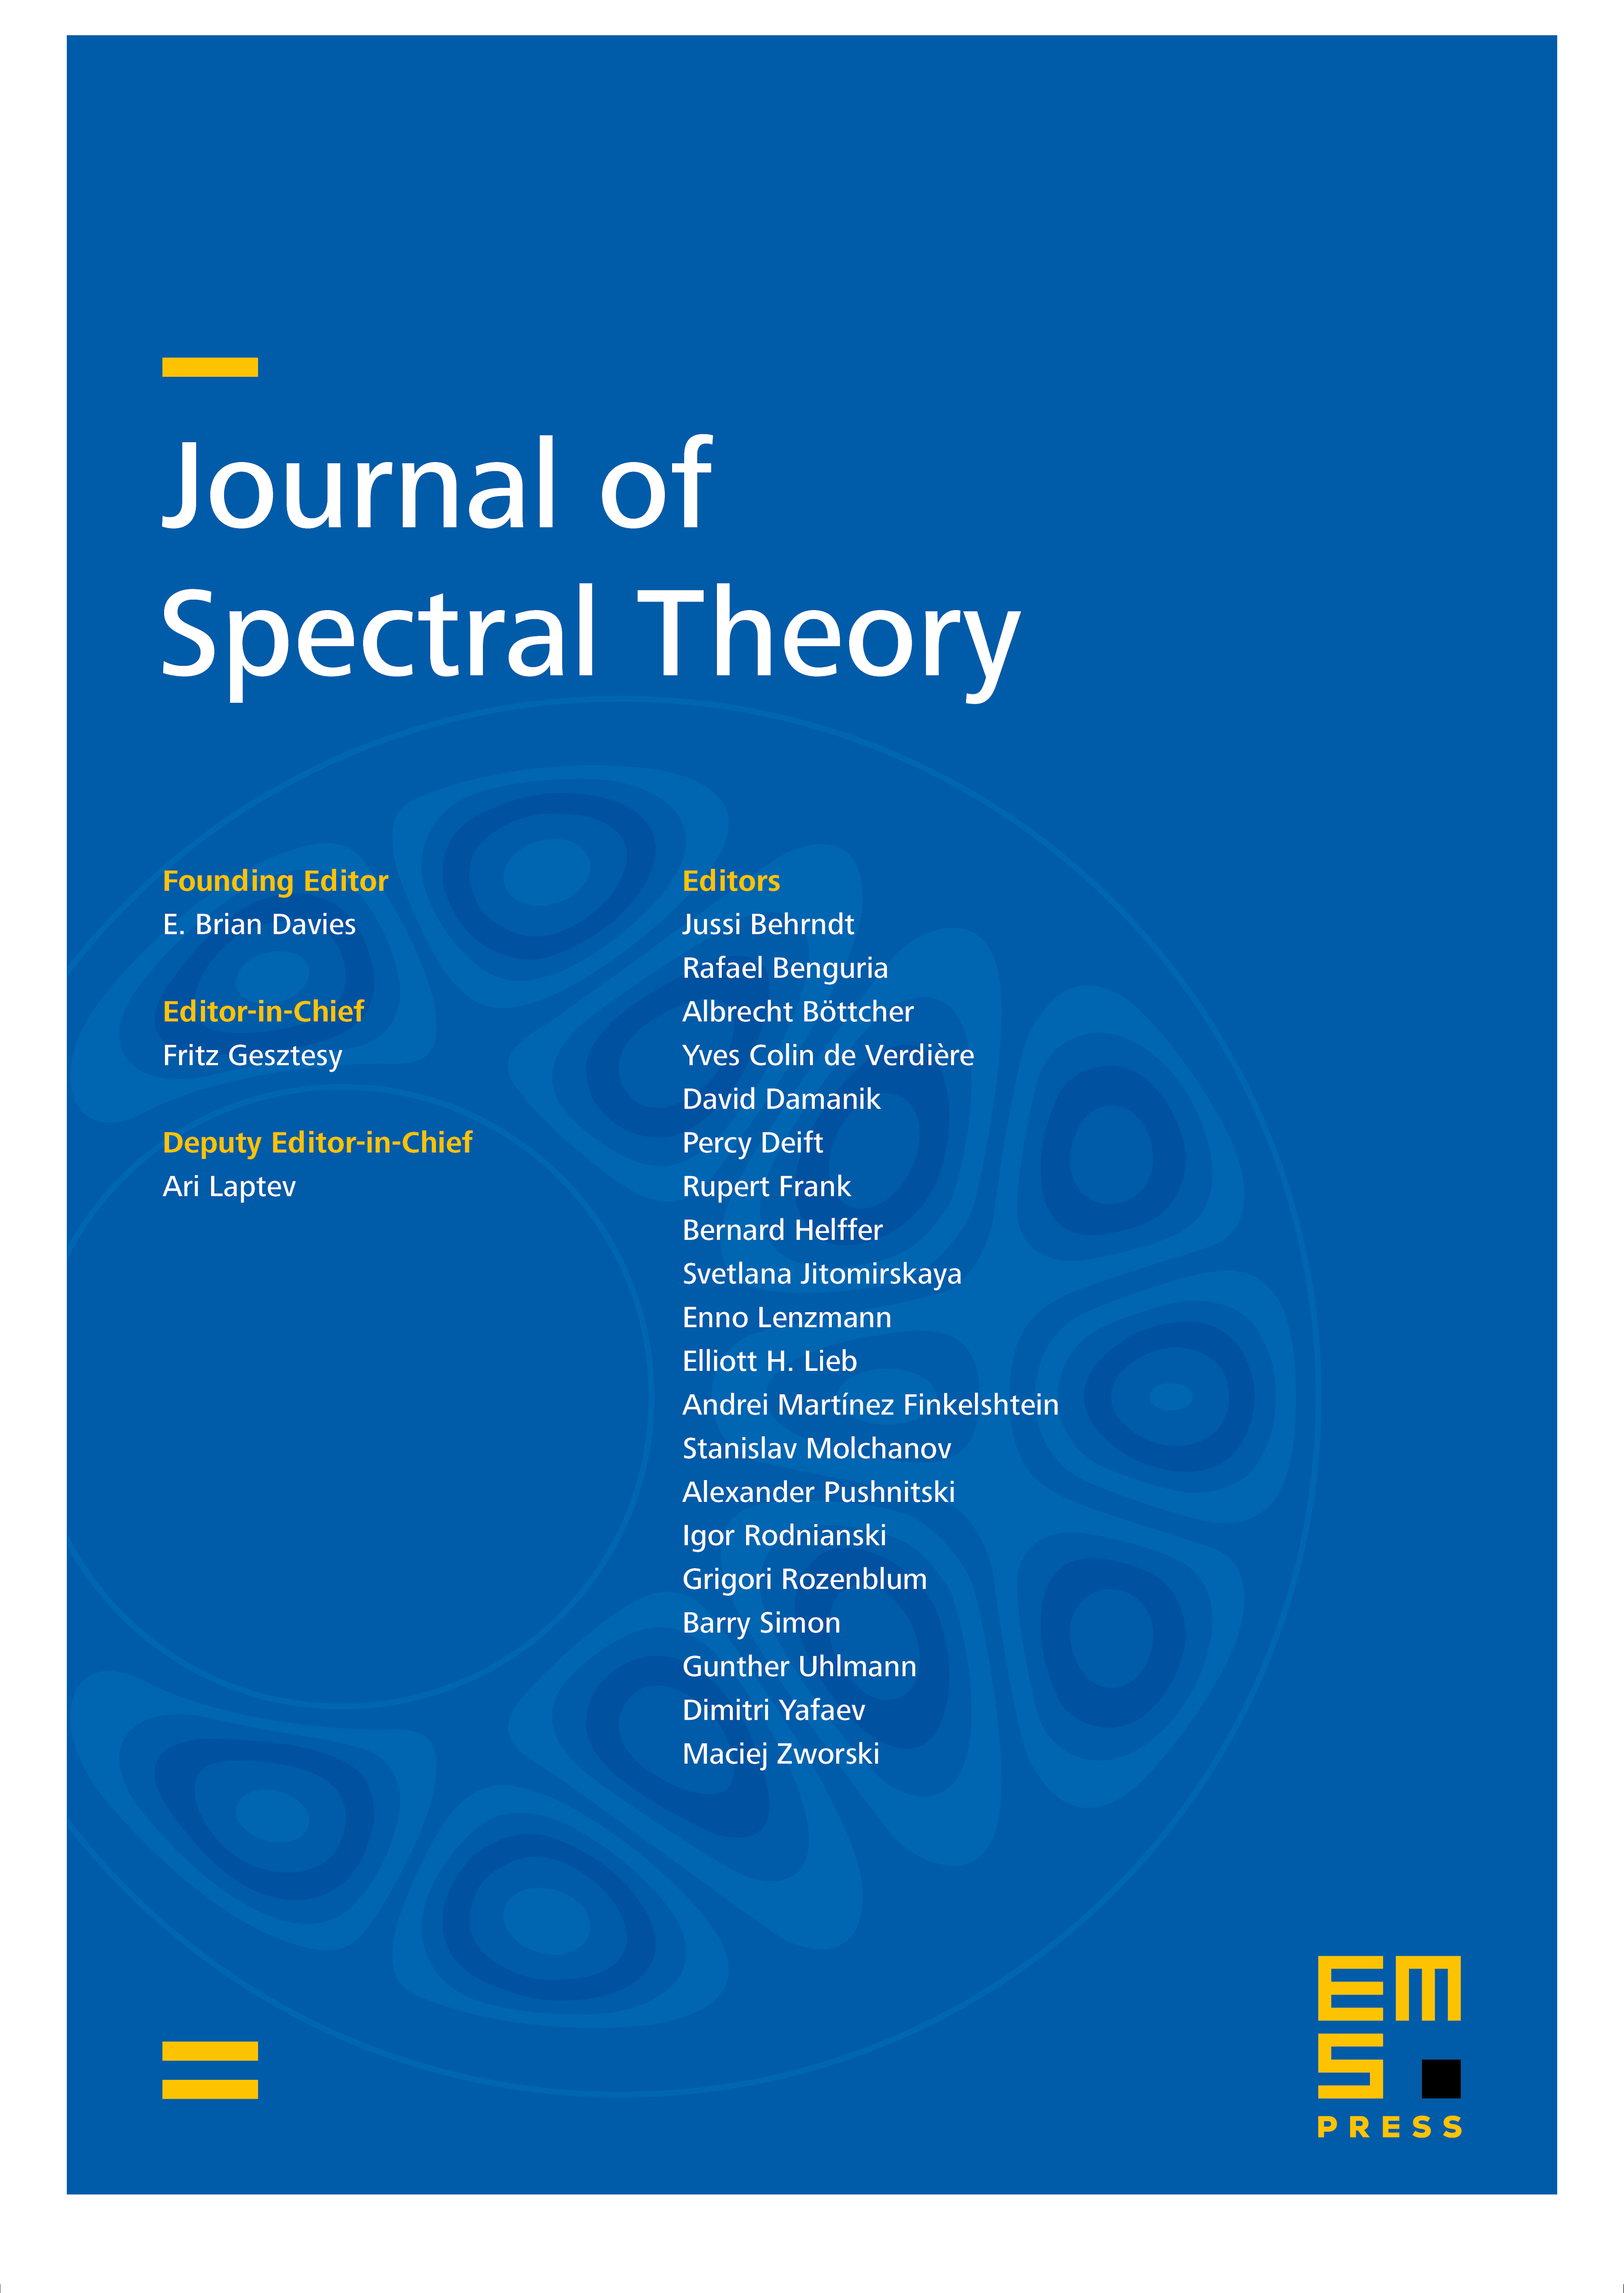 J. Spectr. Theory cover